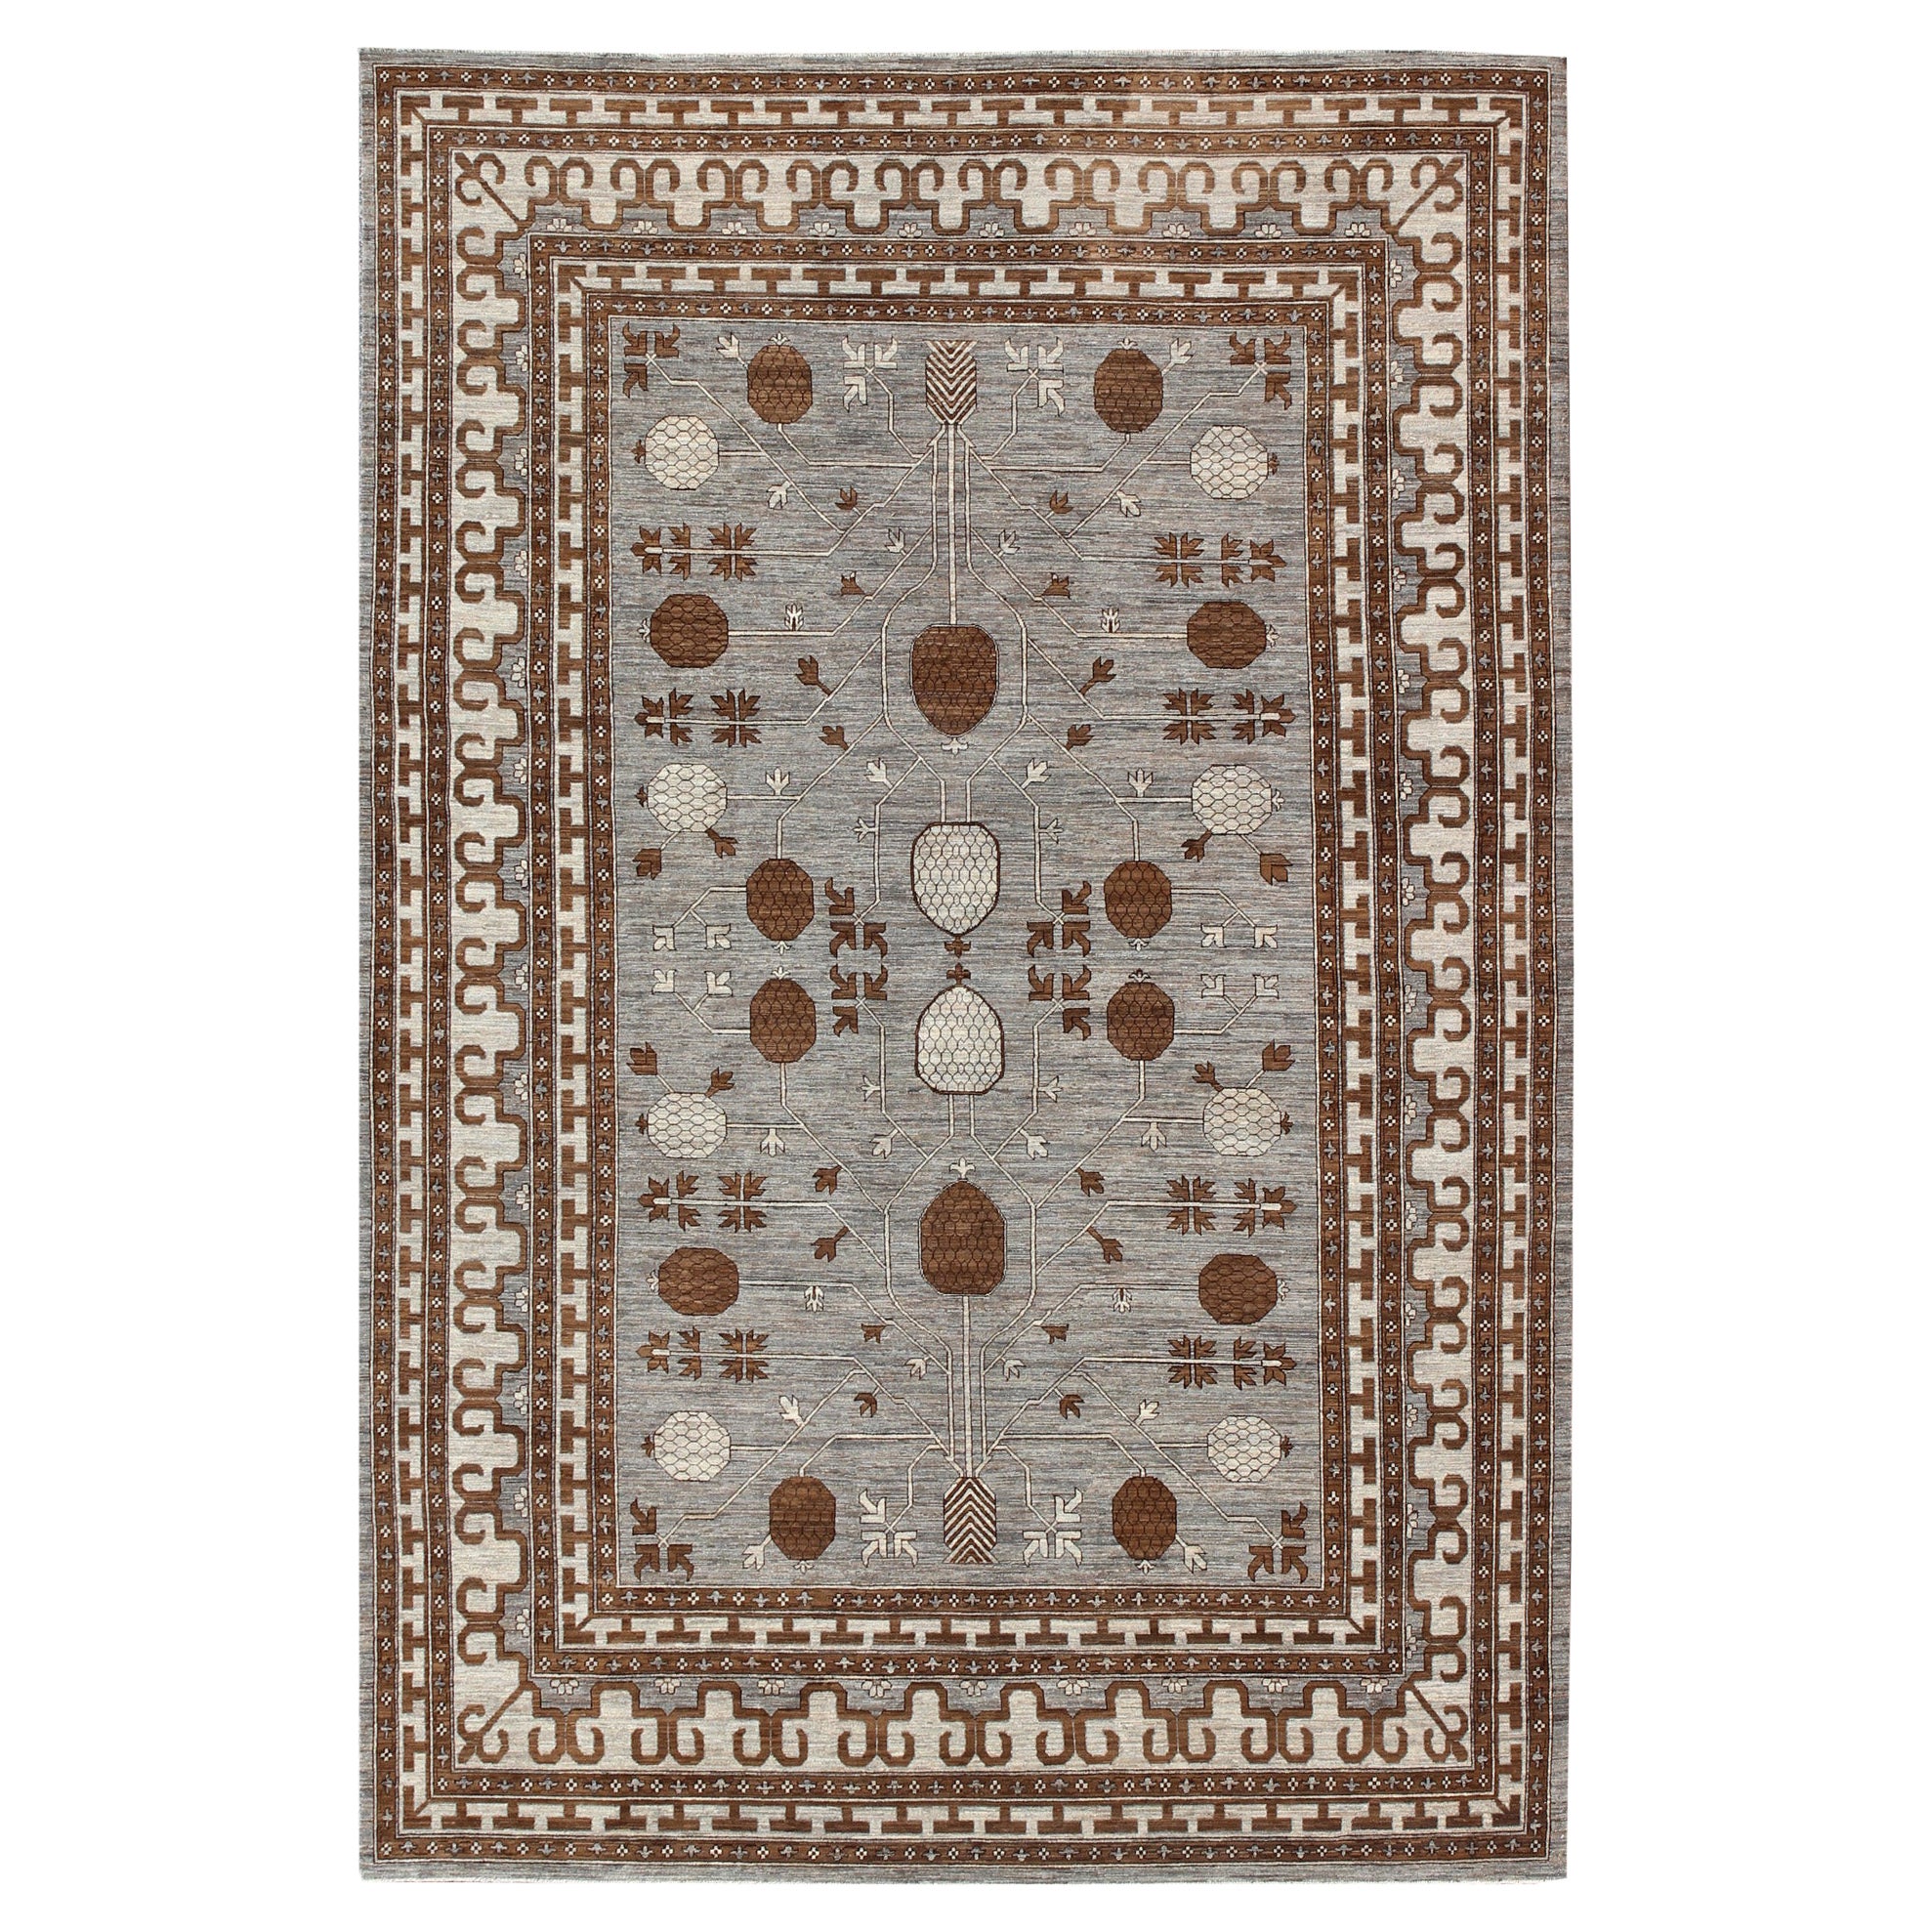 Large All-Over Design Khotan Rug in Gray Background with Brown, Ivory & Taupe